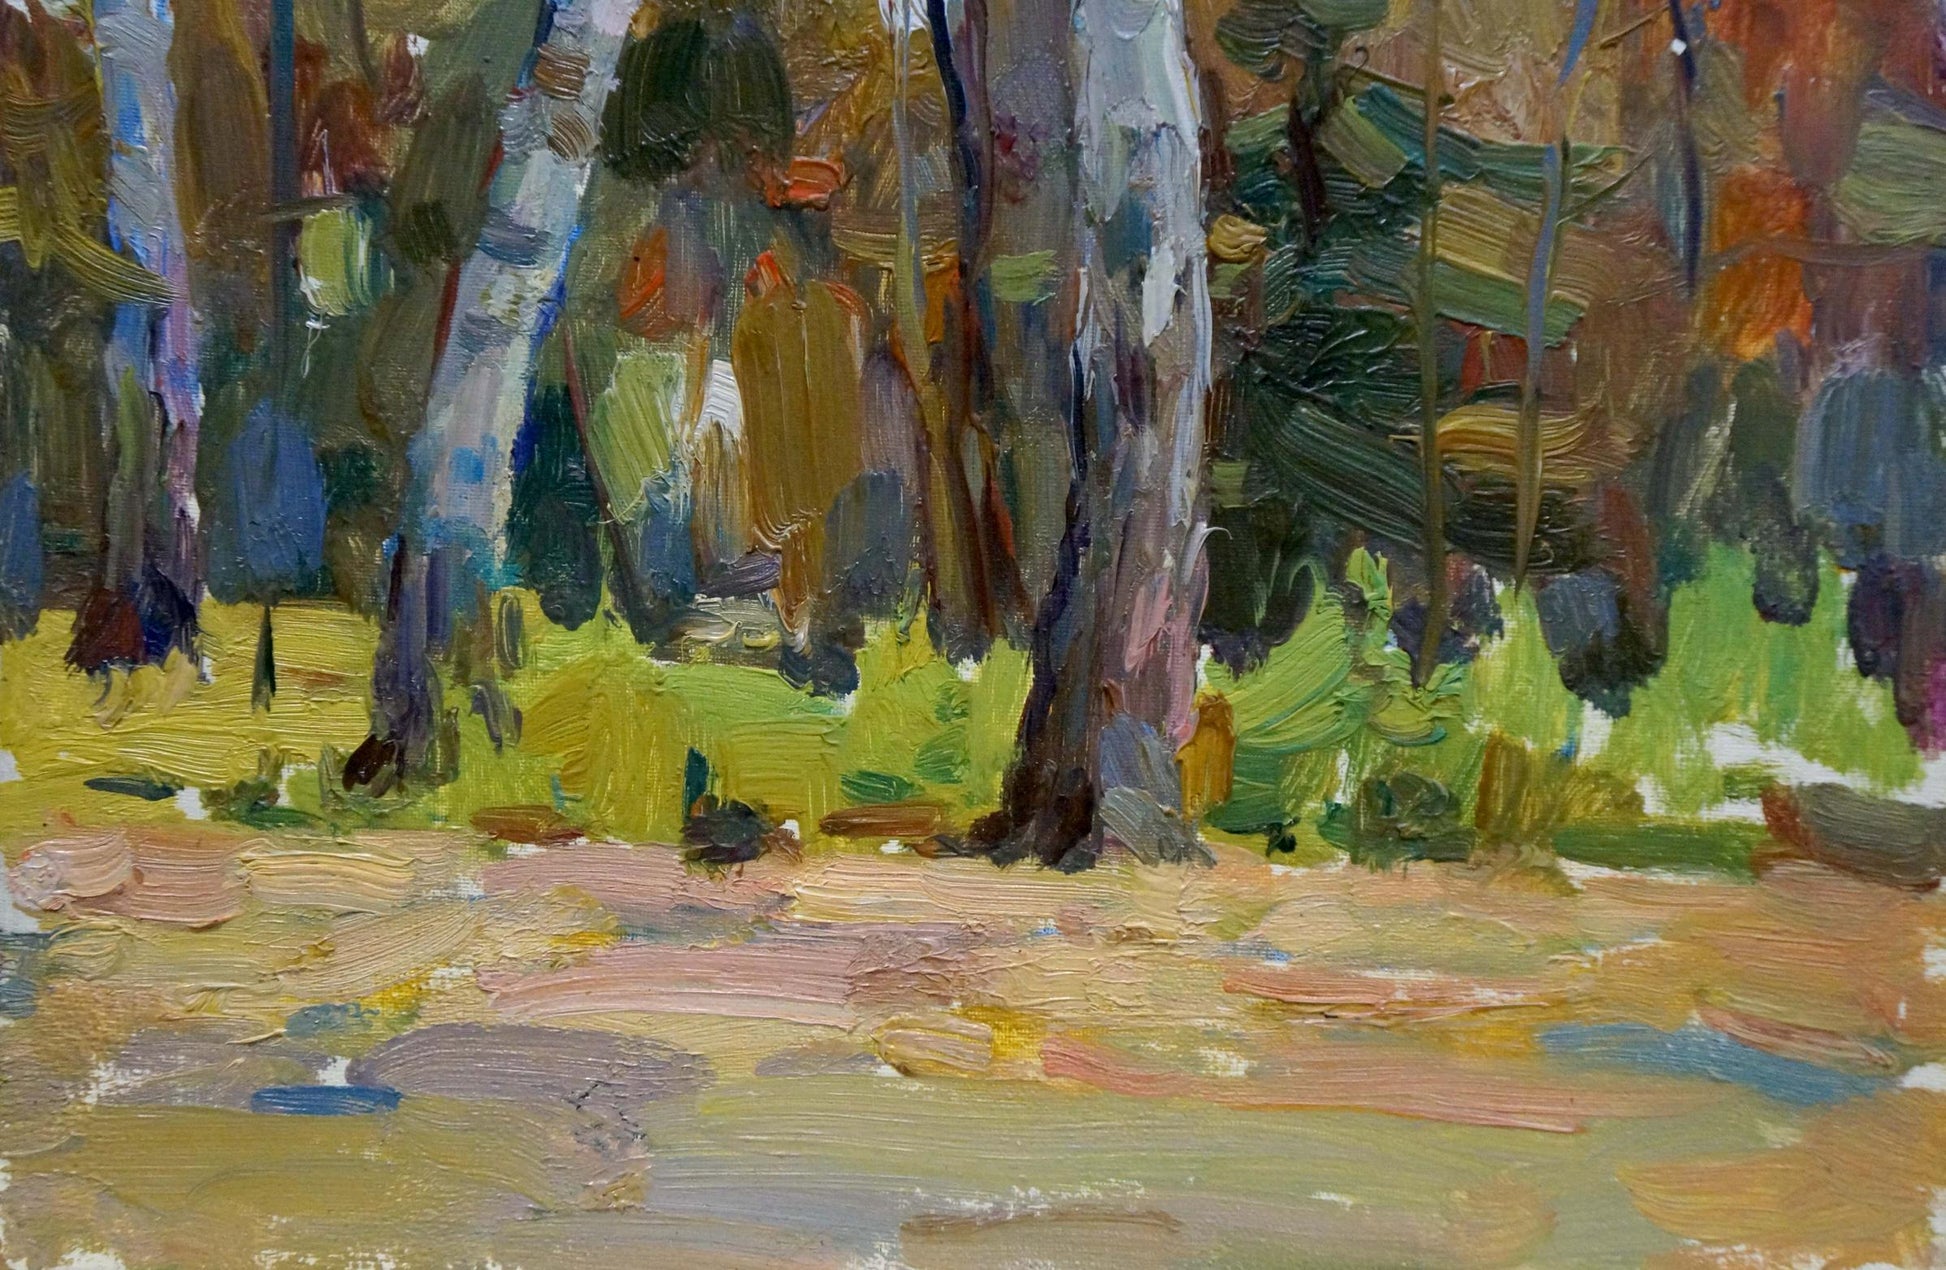 Mikhail Saulovich Turovsky's oil painting depicts a scene in the woods